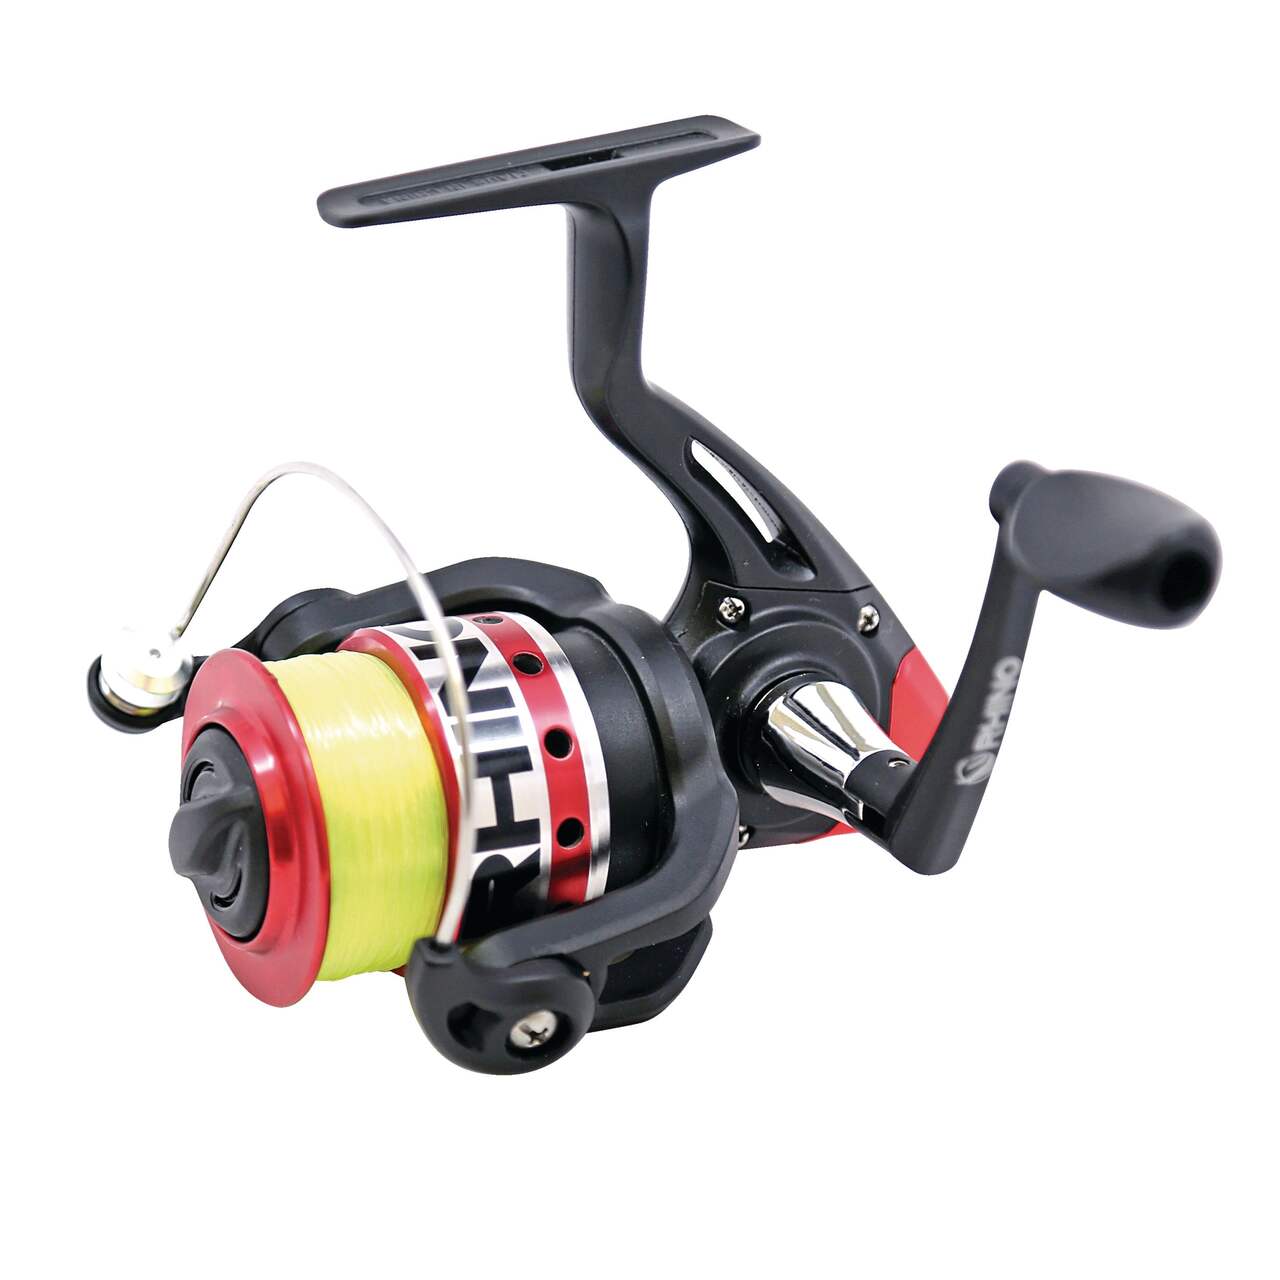  Zebco Spyn Spinning Fishing Reel, Size 10 Reel, Aluminum  Spool, Super Tough Titanium-Nitride Plated Bail Wire, 4.3:1 Gear Ratio,  Pre-Spooled with 6-Pound Zebco Line, Silver/Black : Sports & Outdoors